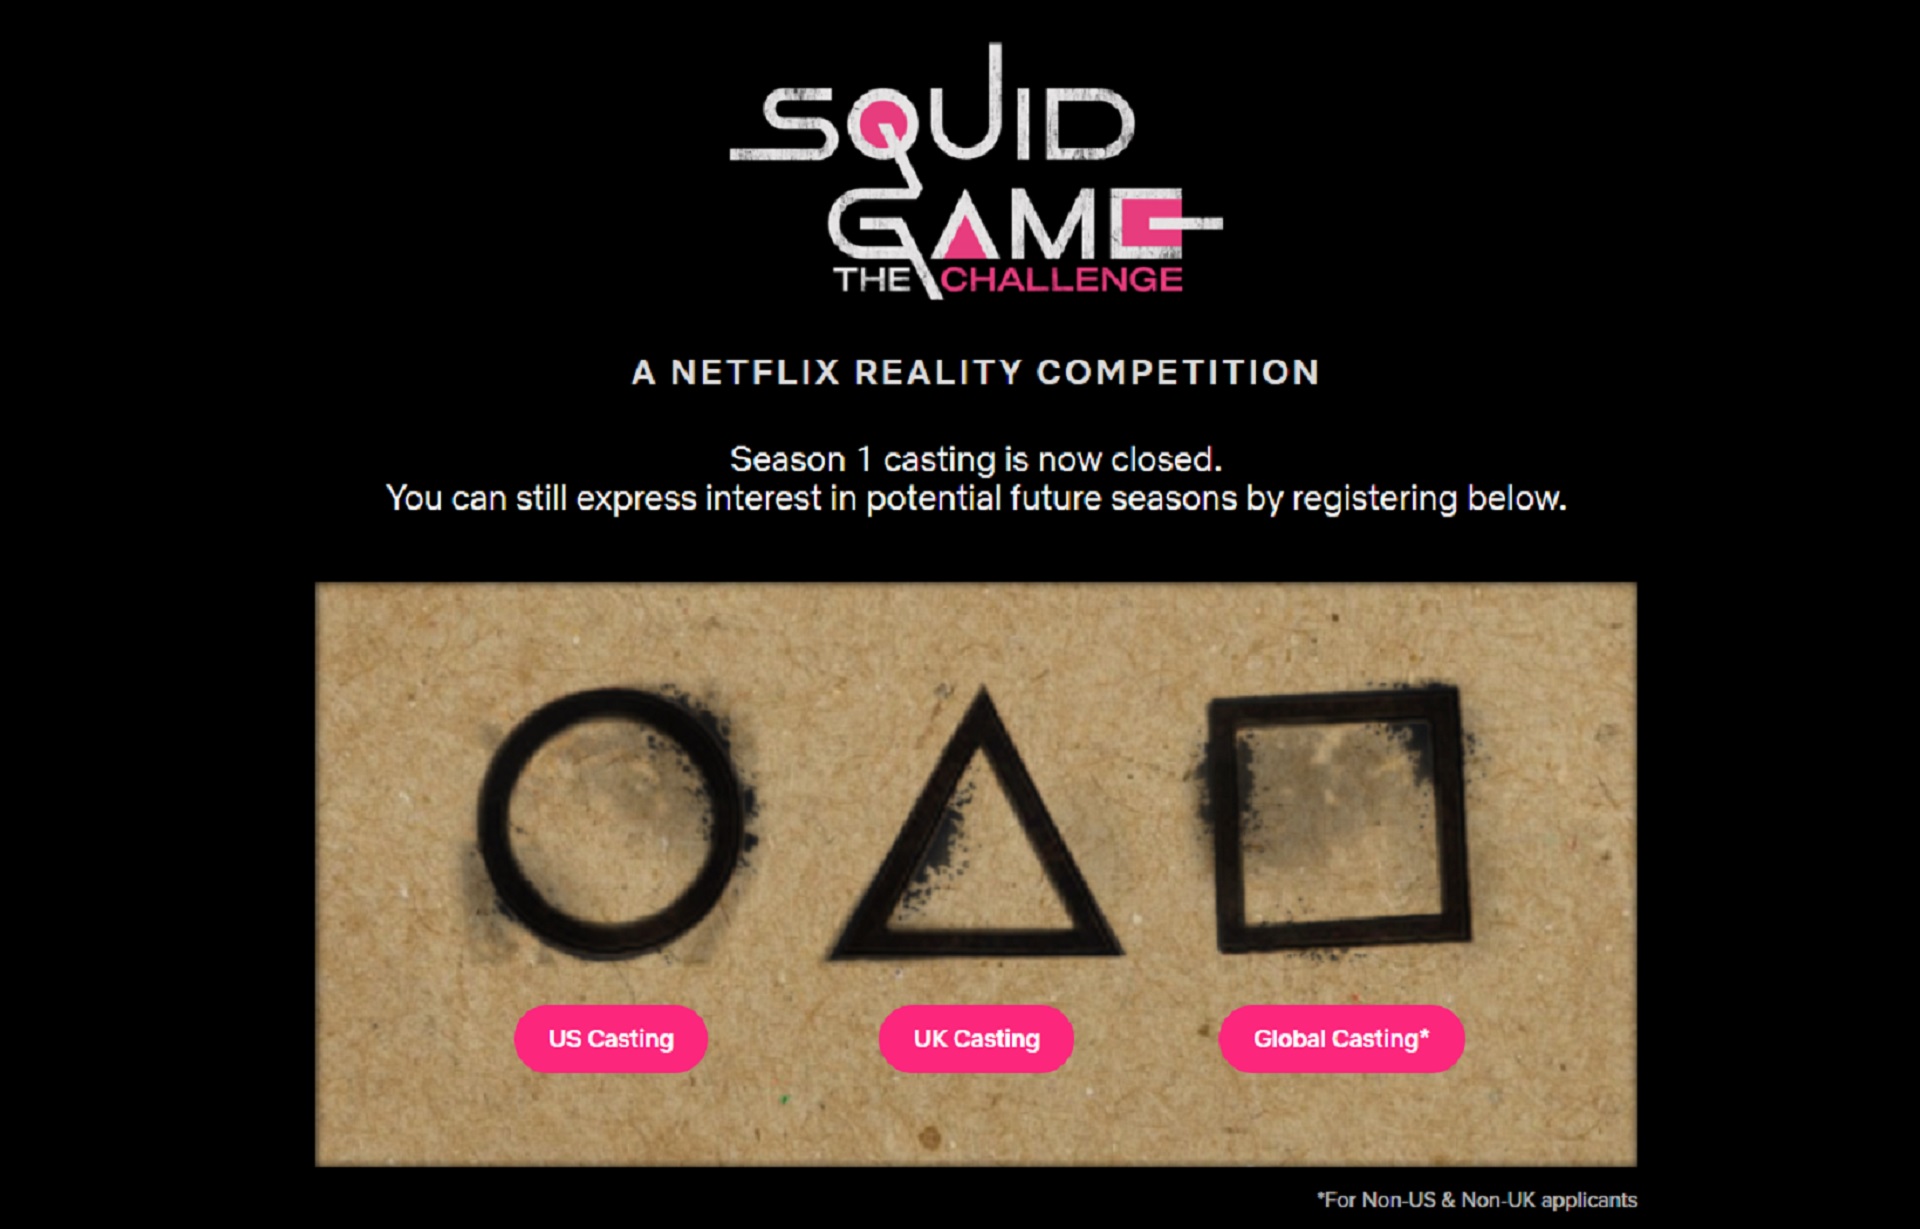 Squid Game The Challenge, netflix reality TV show